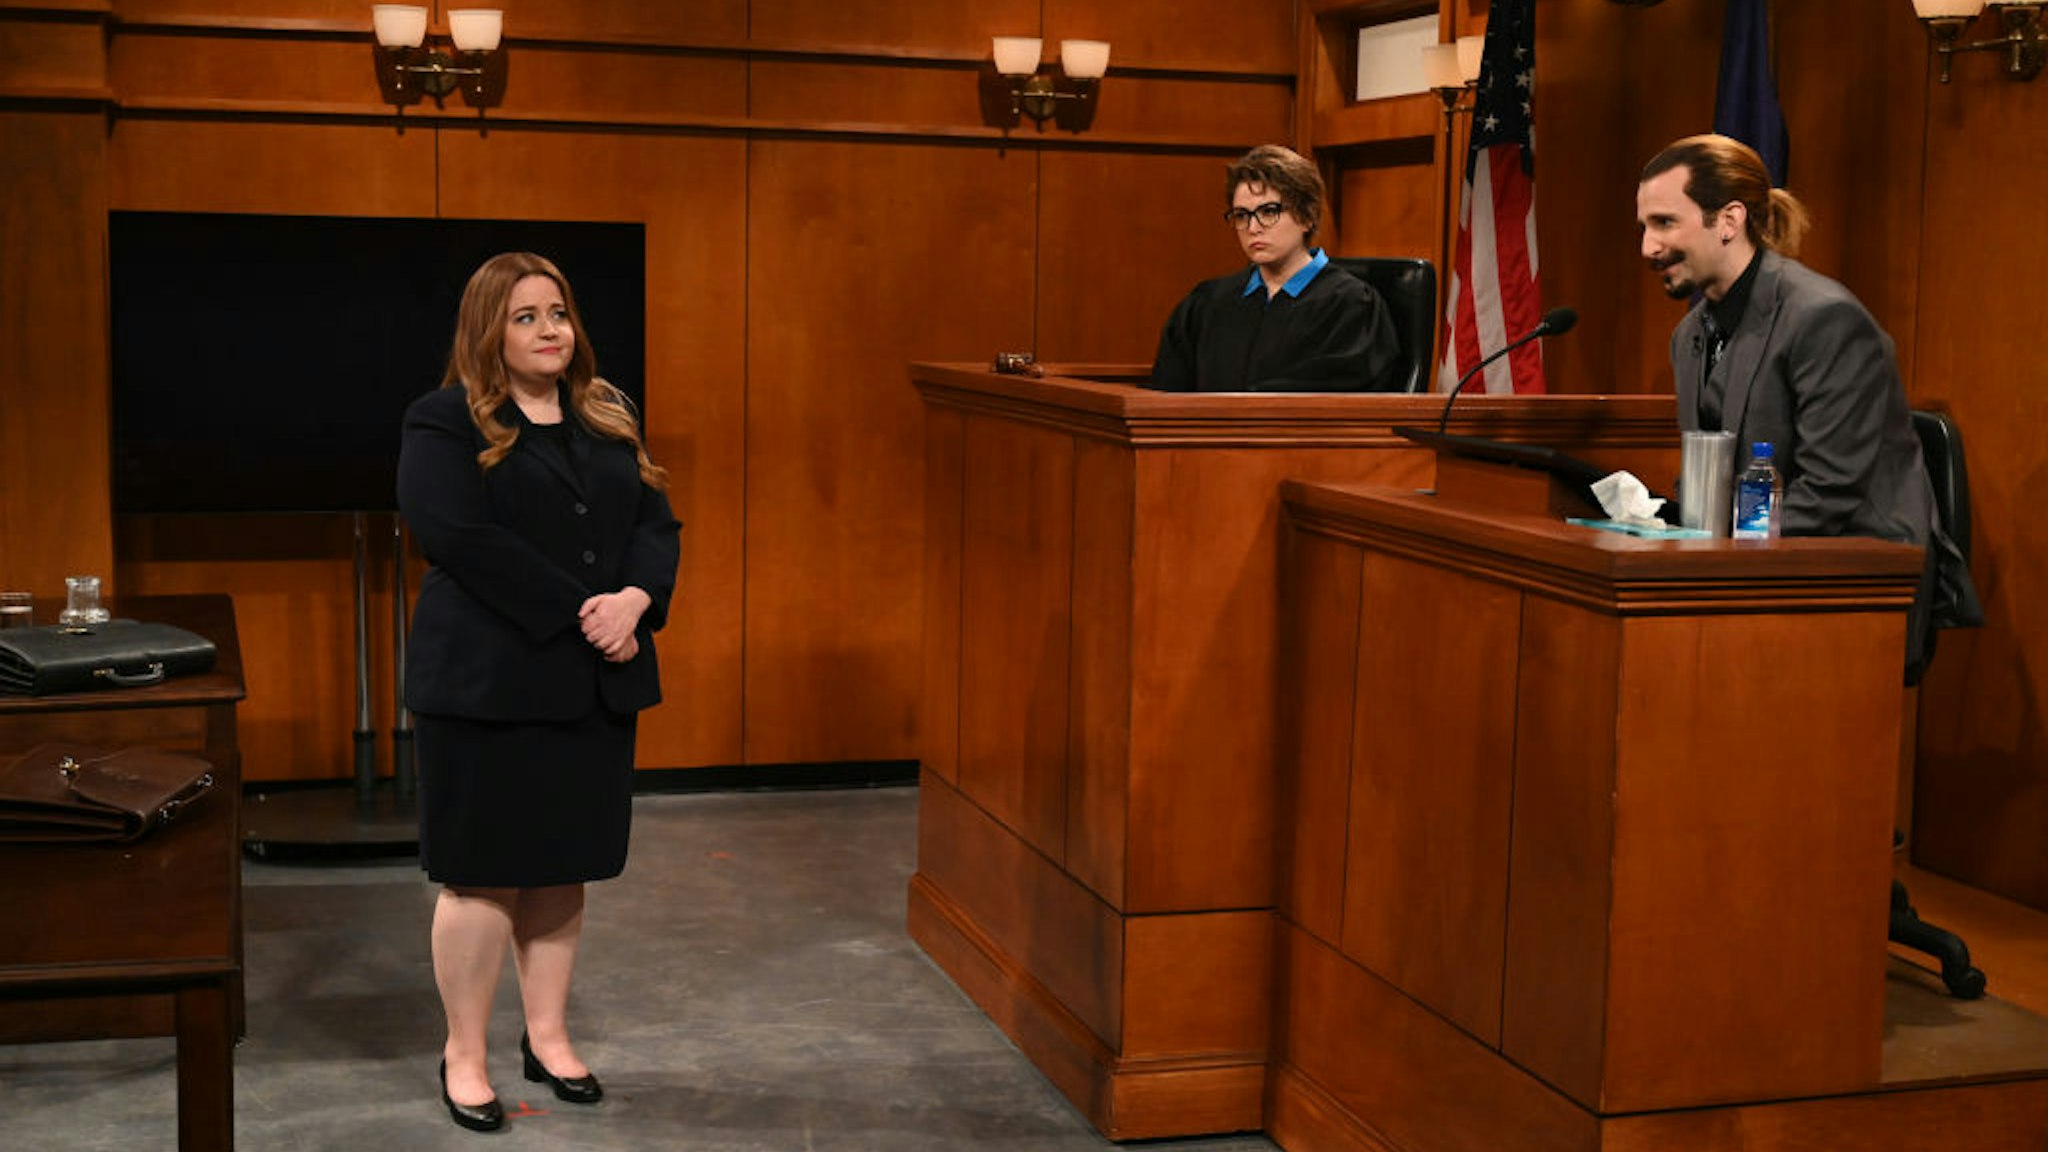 SATURDAY NIGHT LIVE -- Selena Gomez, Post Malone Episode 1825 -- Pictured: (l-r) Aidy Bryant, Cecily Strong, and Kyle Mooney as Johnny Depp during the Trial Witness Cold Open on Saturday, May 14, 2022 -- (Photo by: Will Heath/NBC/NBCU Photo Bank via Getty Images)